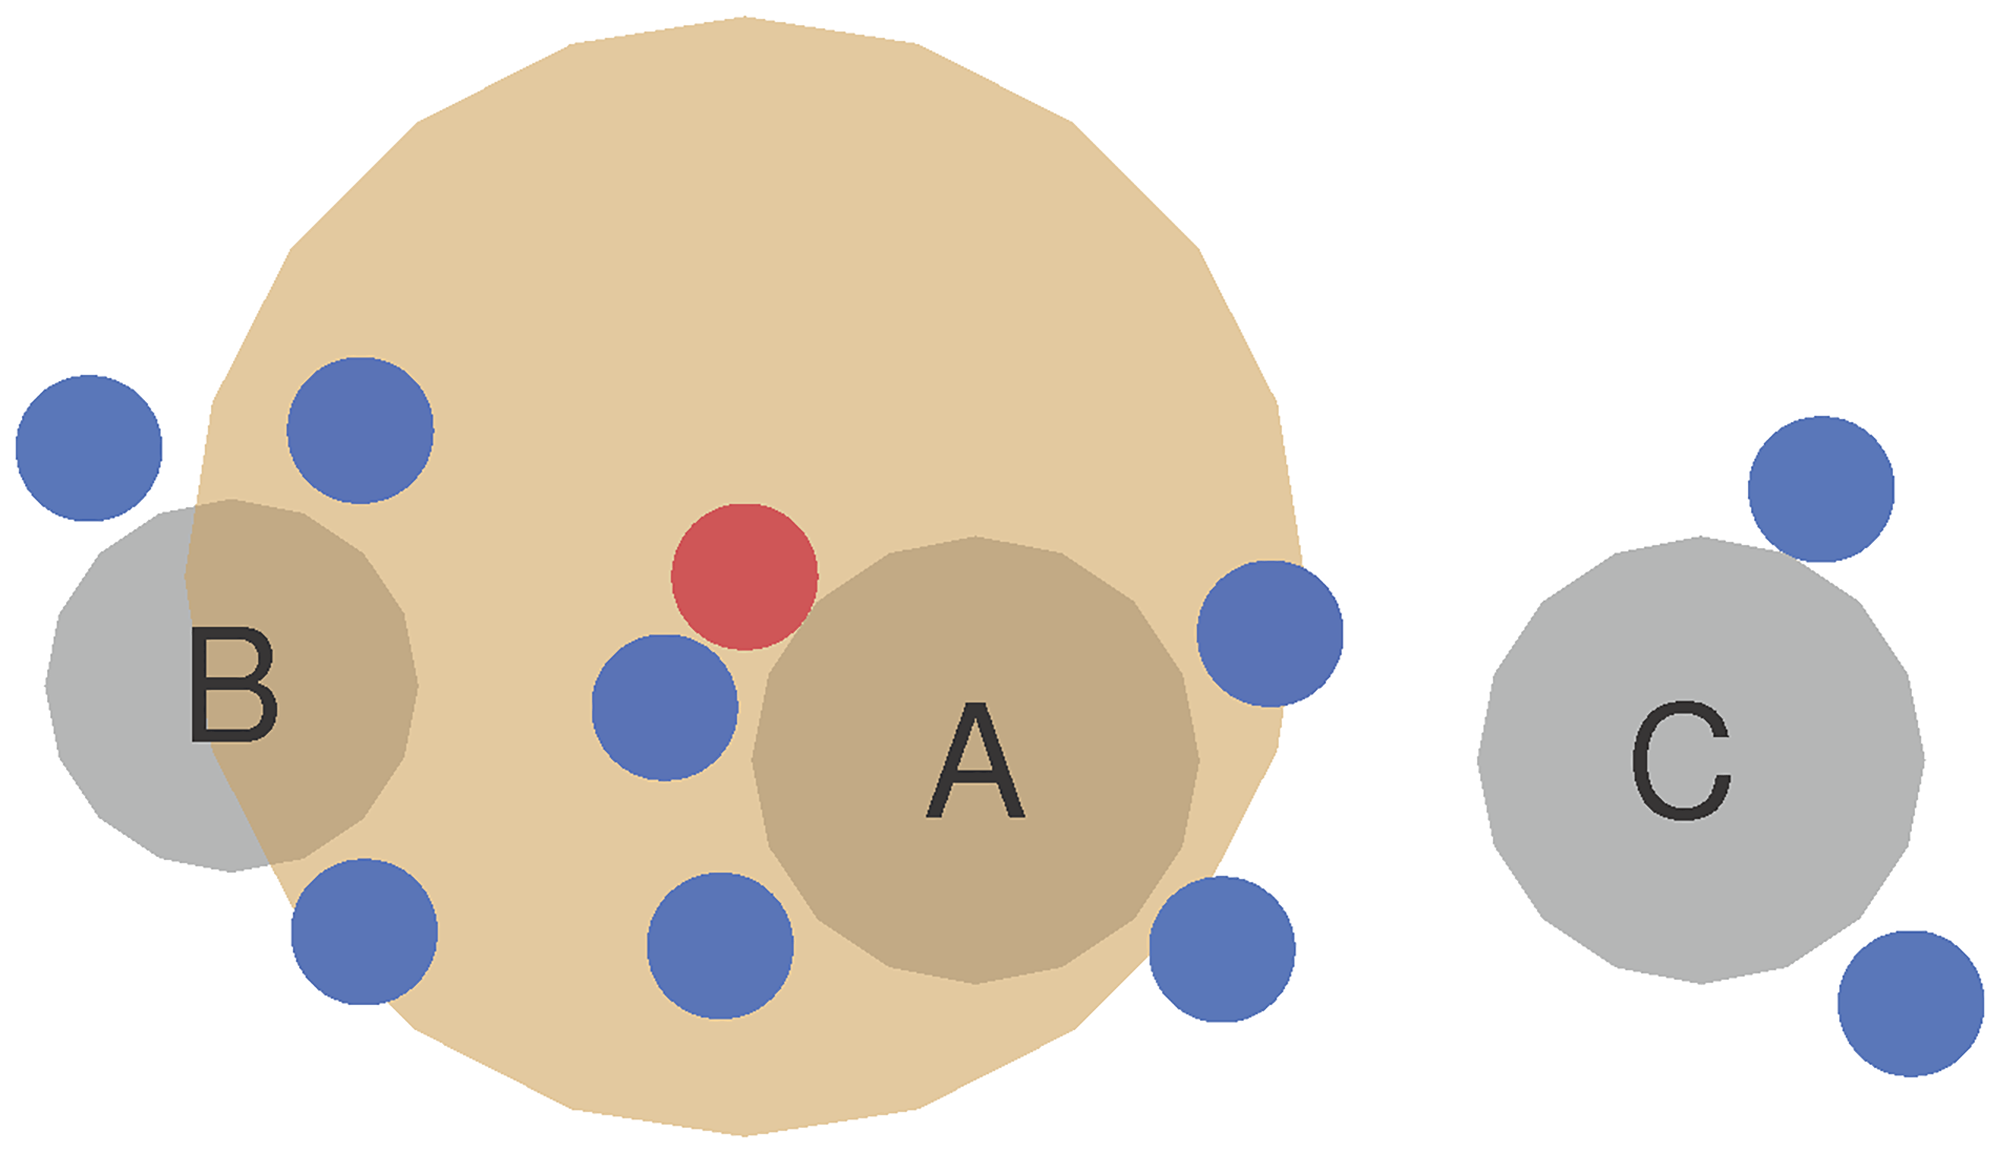 Restaurant scenario. Model of restaurant topography, including tables and seats, according to the seating chart. Susceptible (blue) persons sit in groups A, B and C around the tables (grey). The infectious (red) person emits aerosol clouds (orange).